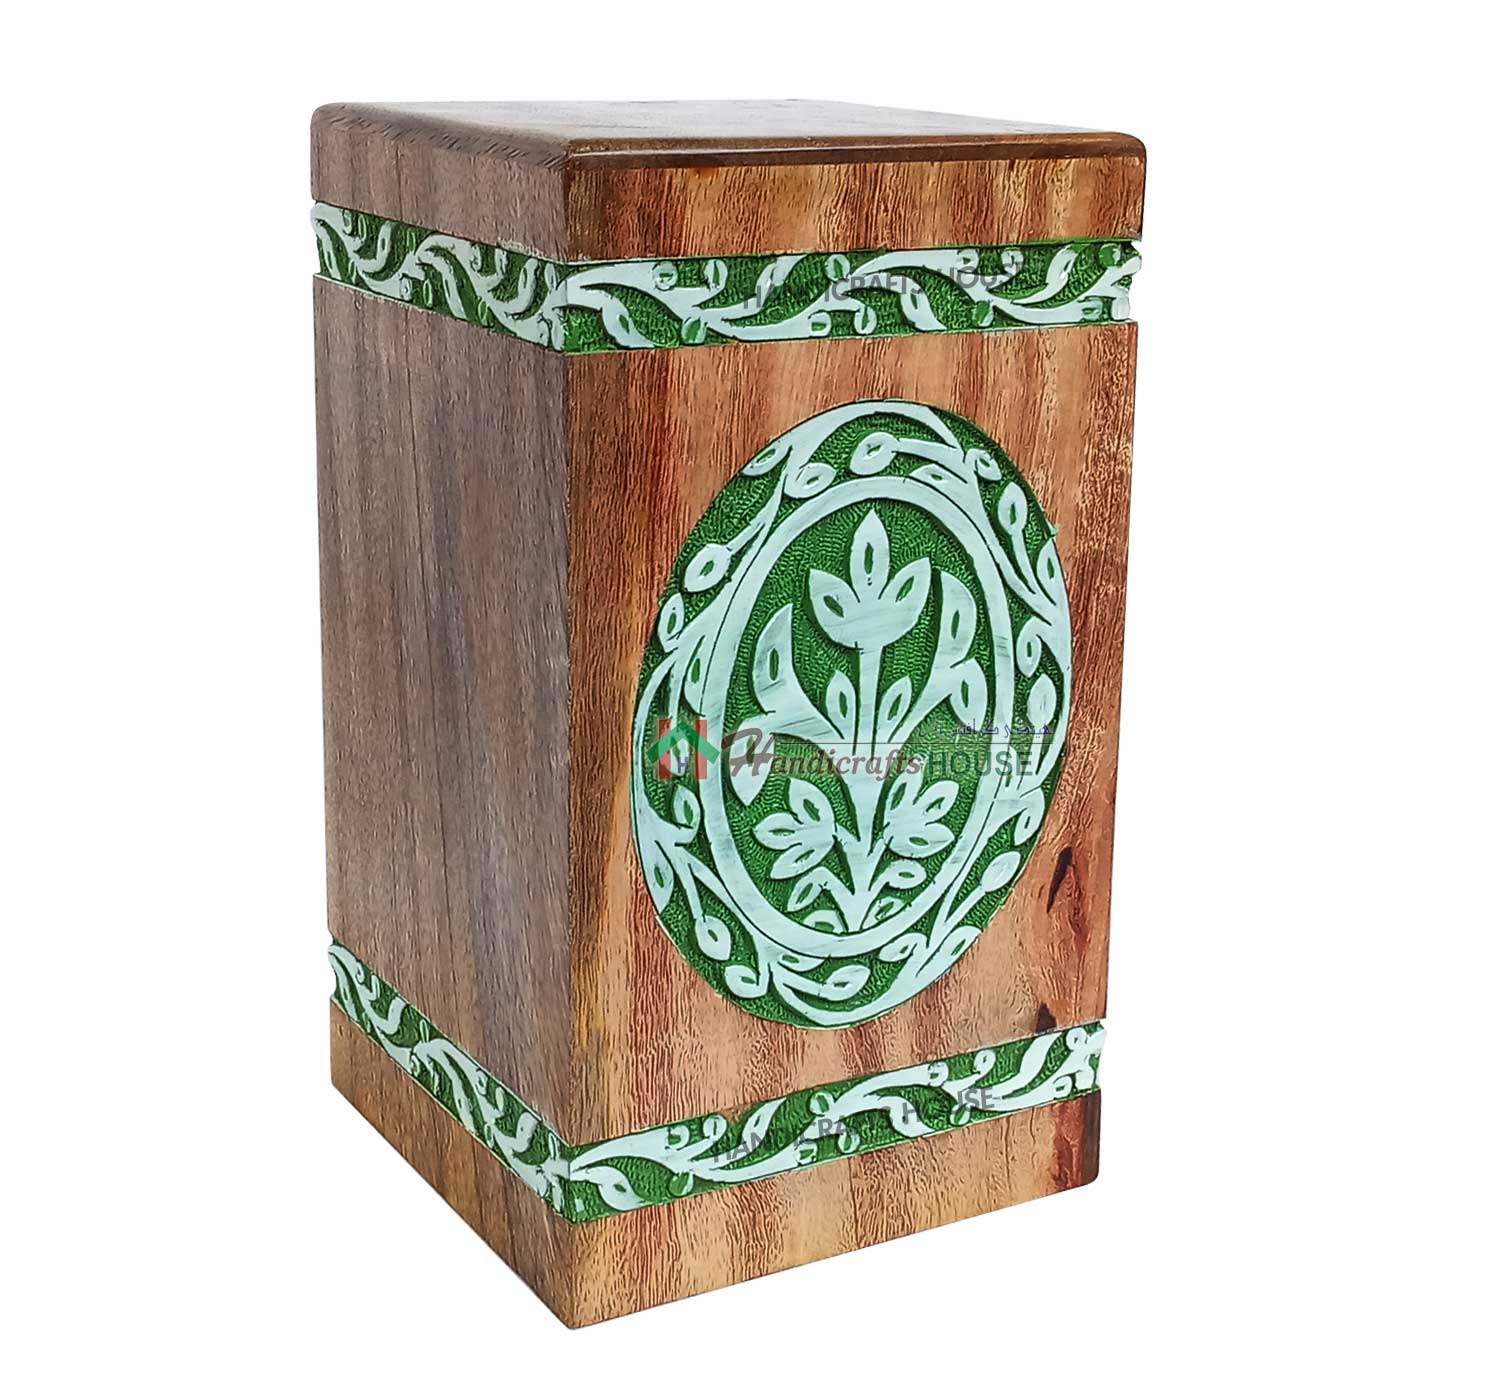 Wooden Cremation Casket Urns For Loved One, Wood Boxes For Human Ashes, Unique Keepsake